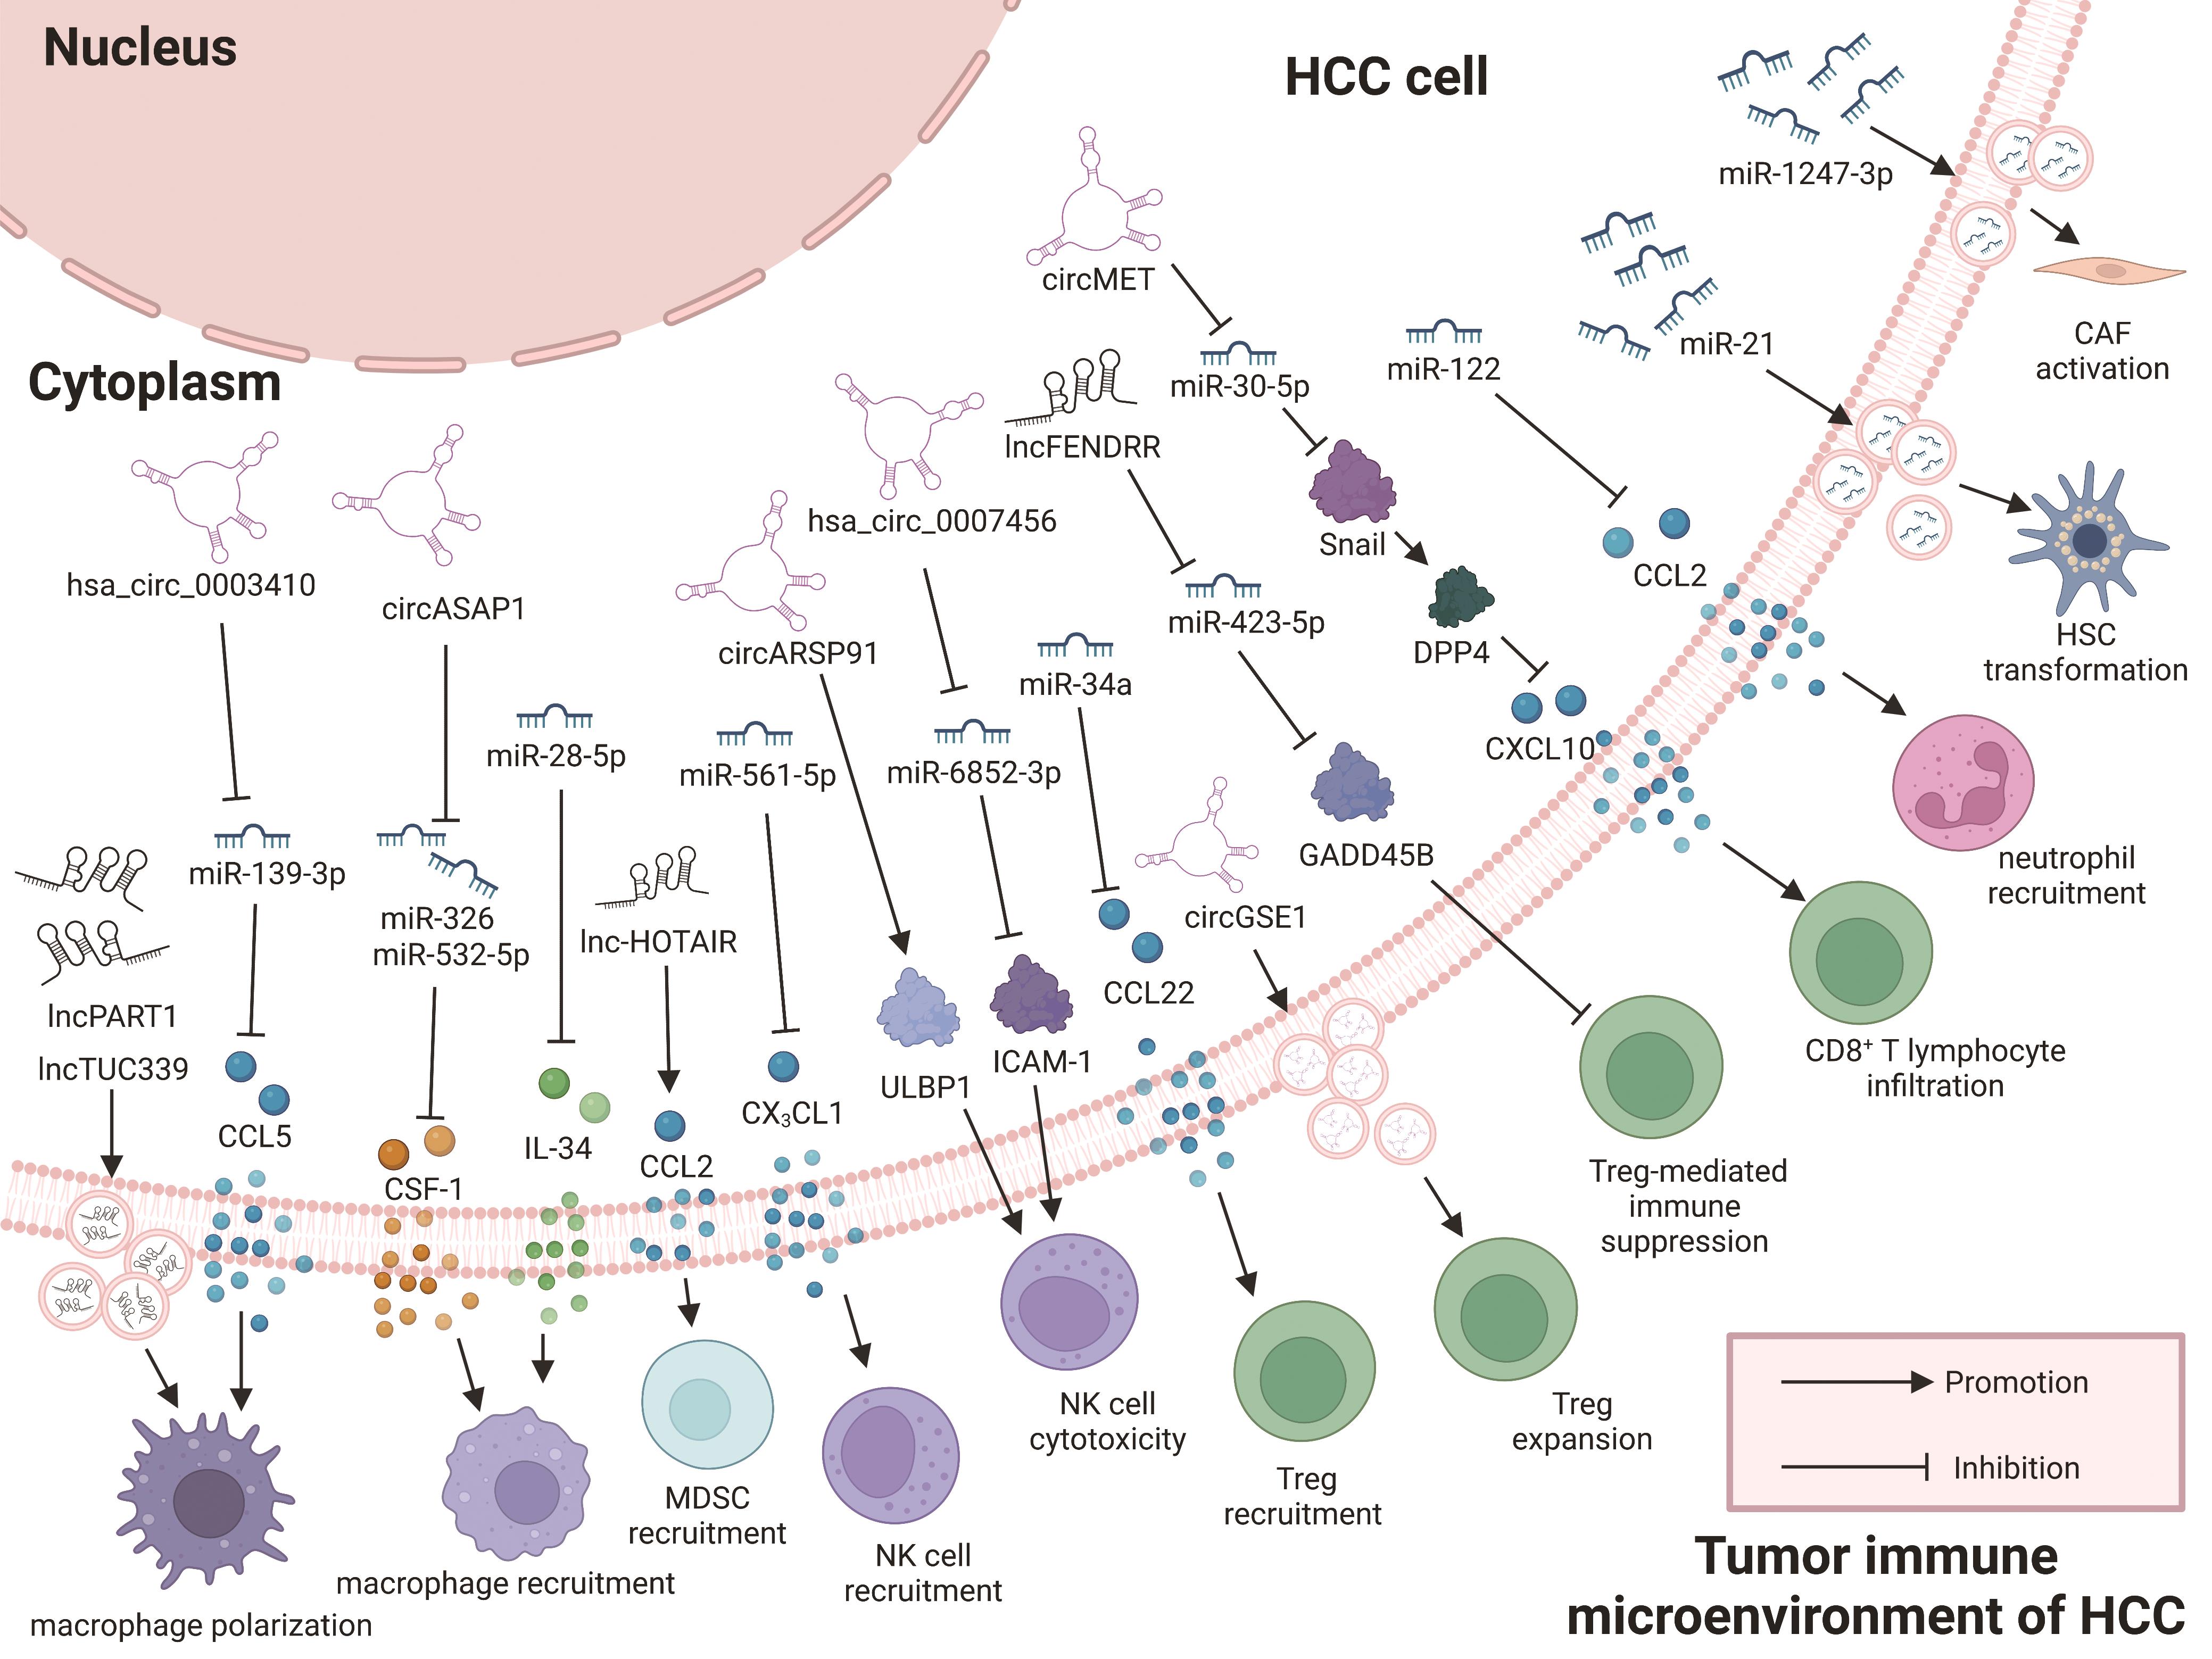 ncRNA-mediated regulation of TIME. ncRNAs (miRNAs/lncRNAs/circRNAs) regulate the development, activation, recruitment, and cellular function of multiple cell types within TIME of HCC by diverse mechanisms.